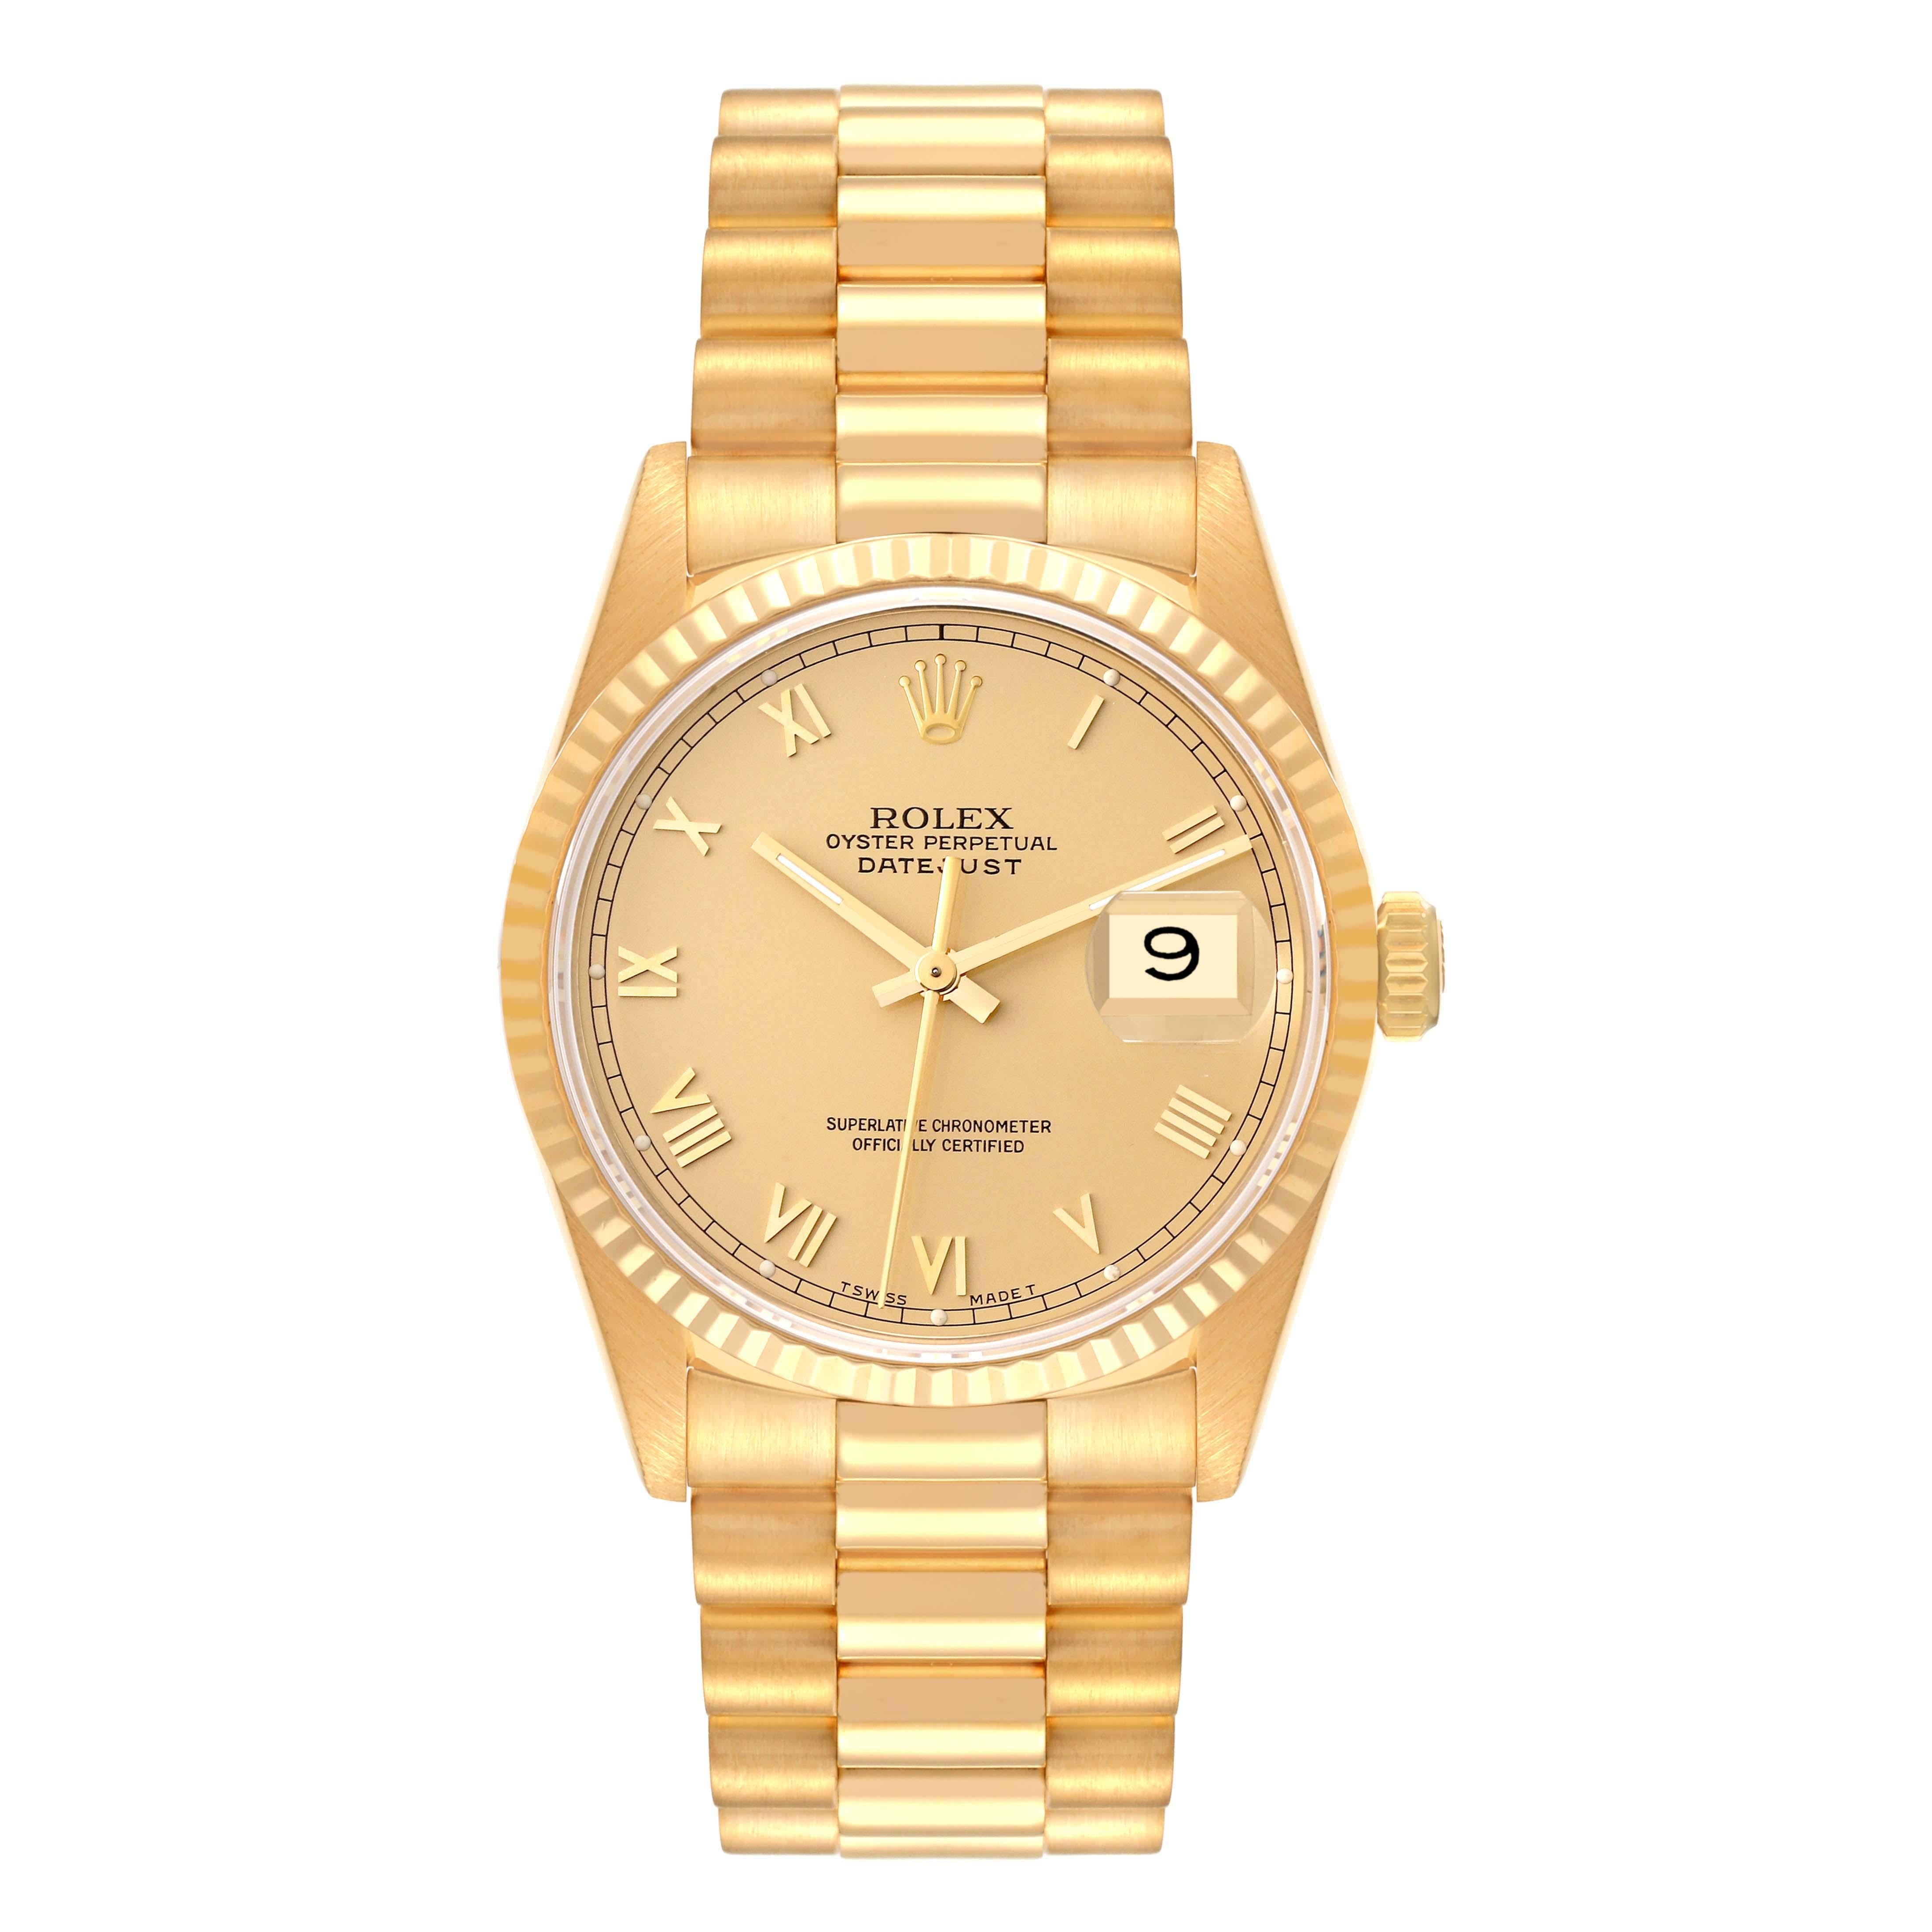 Rolex Datejust President Yellow Gold Roman Dial Mens Watch 16238. Officially certified chronometer self-winding movement. 18k yellow gold case 36.0 mm in diameter. Rolex logo on a crown. 18k yellow gold fluted bezel. Scratch resistant sapphire